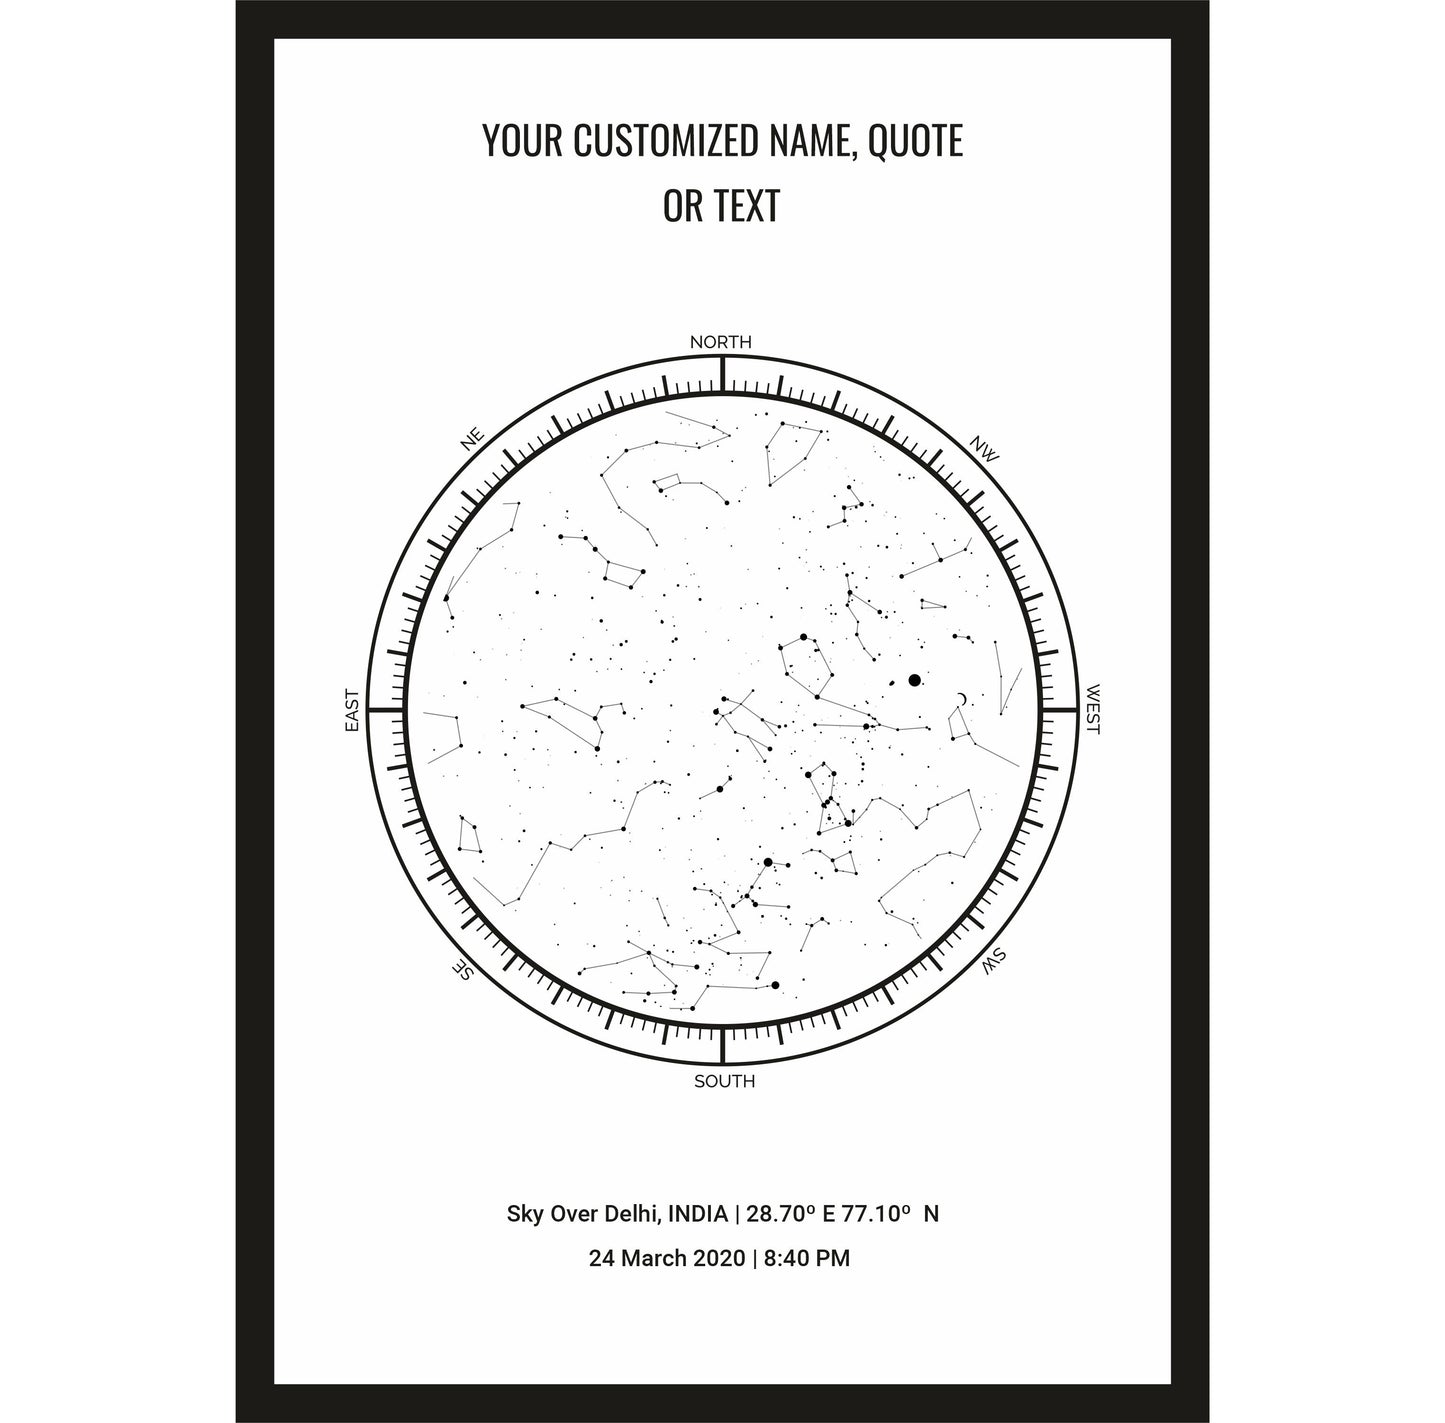 Customized Star Map Frame with Personal Quote or Message